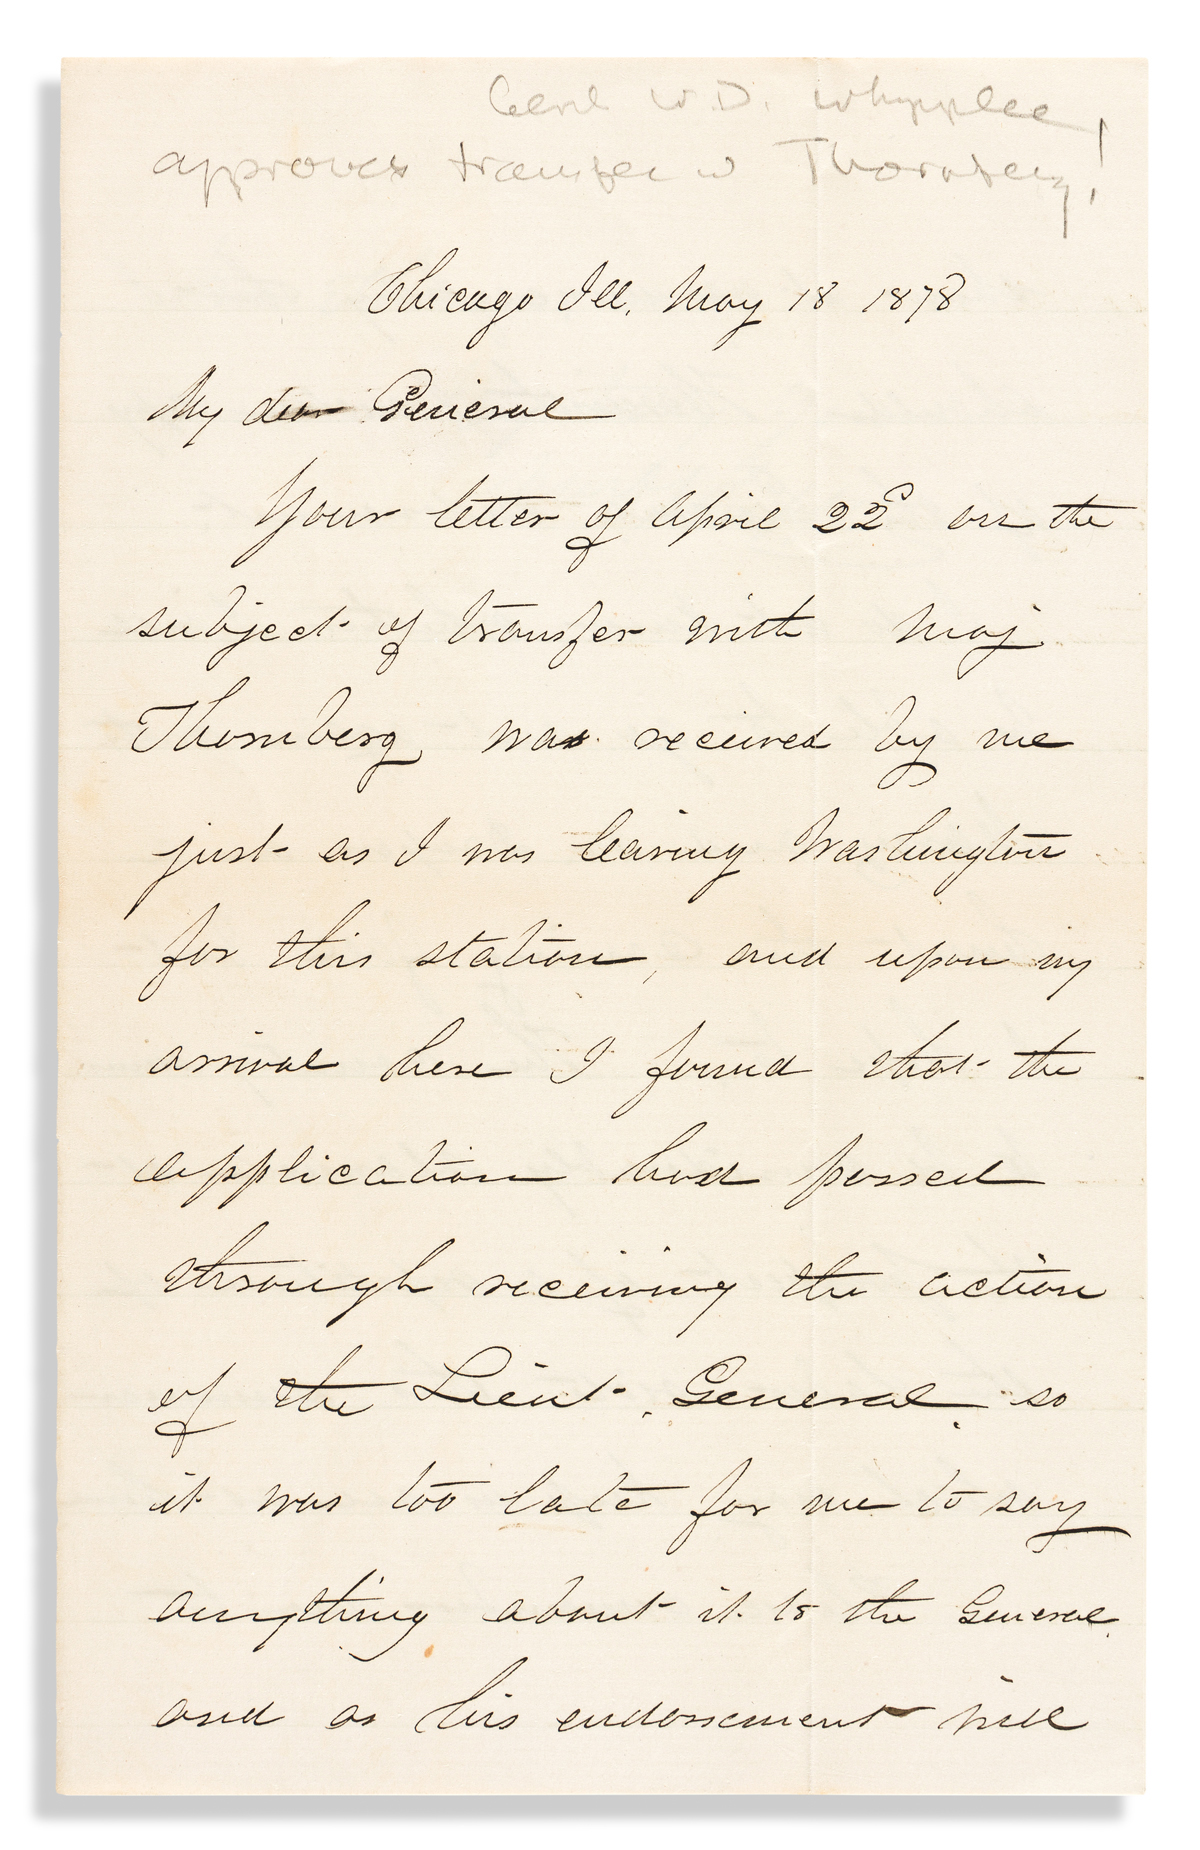 (WEST--COLORADO.) William Whipple. Letter confirming the transfer of the doomed Major Thornburgh of the Milk River Massacre.